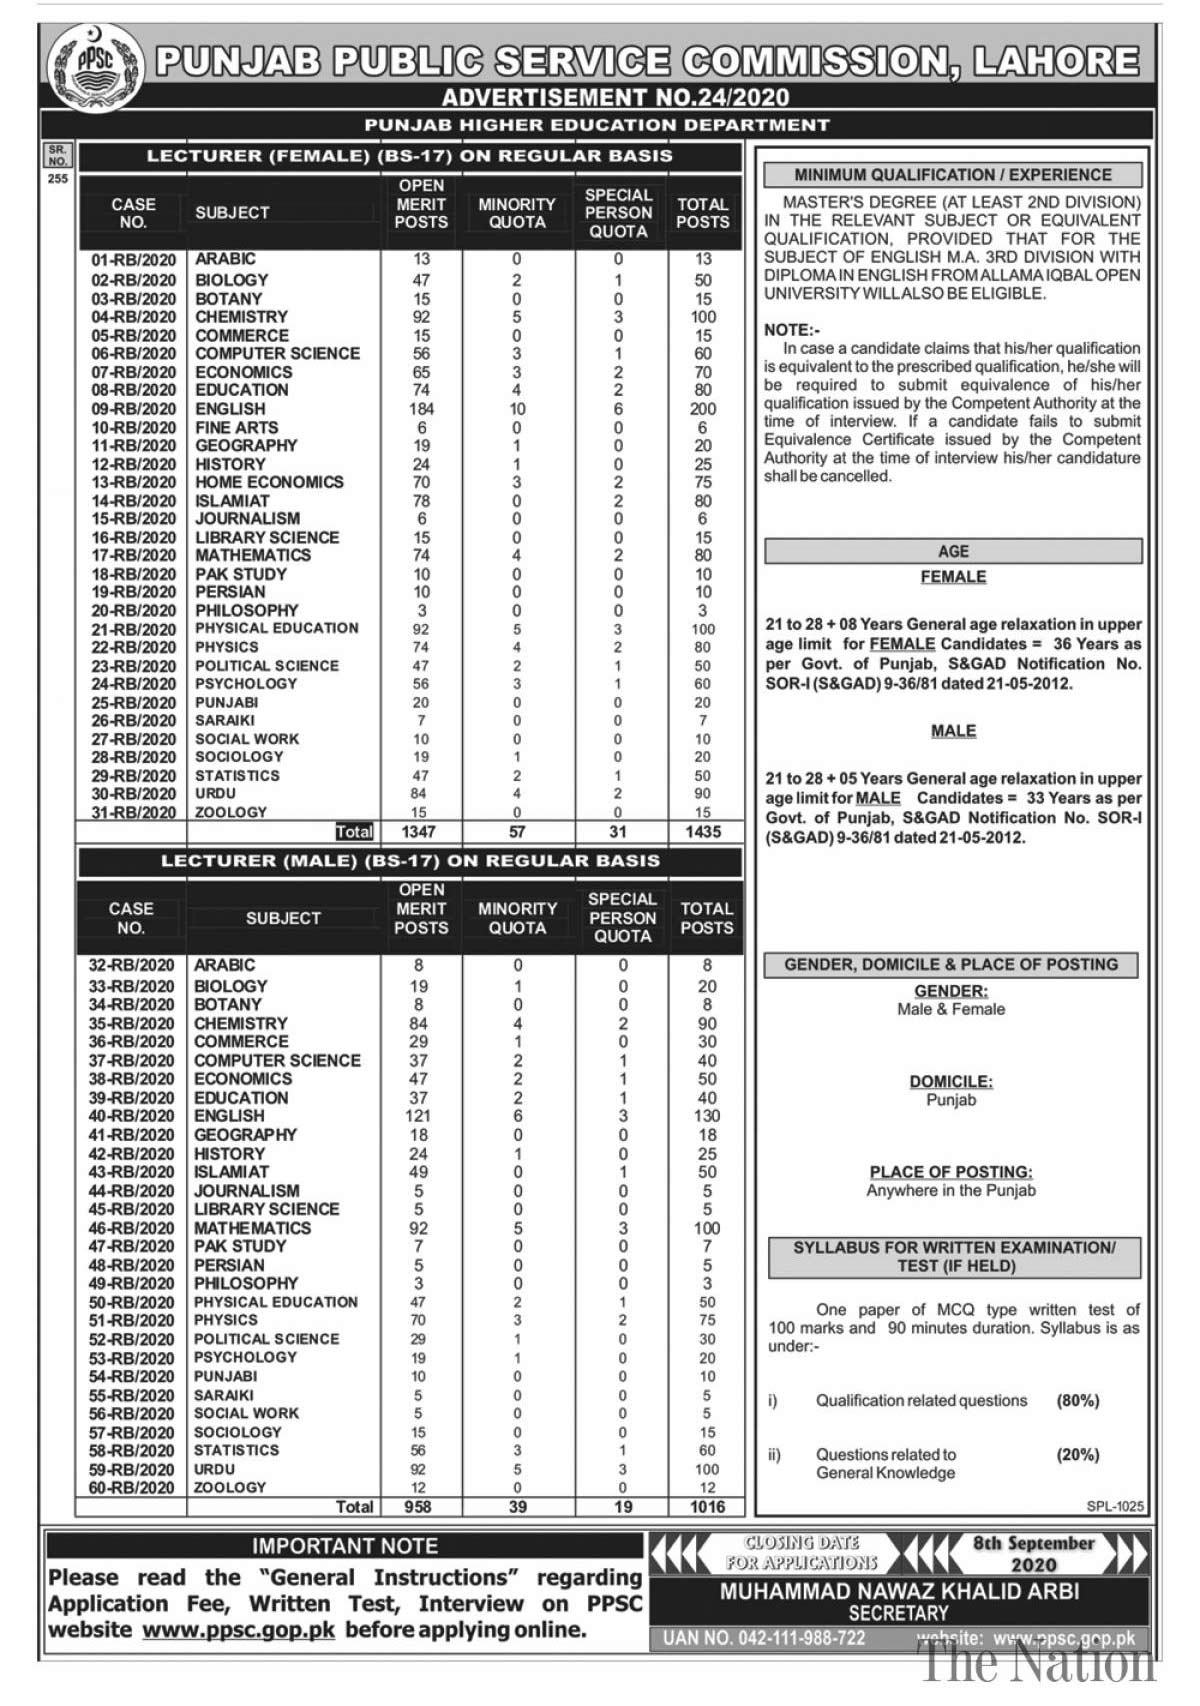 PPSC Lecturer Jobs August 24/2020 - HED Lecturer Jobs August 2020 - Latest Advertisement on - August 23, 2020